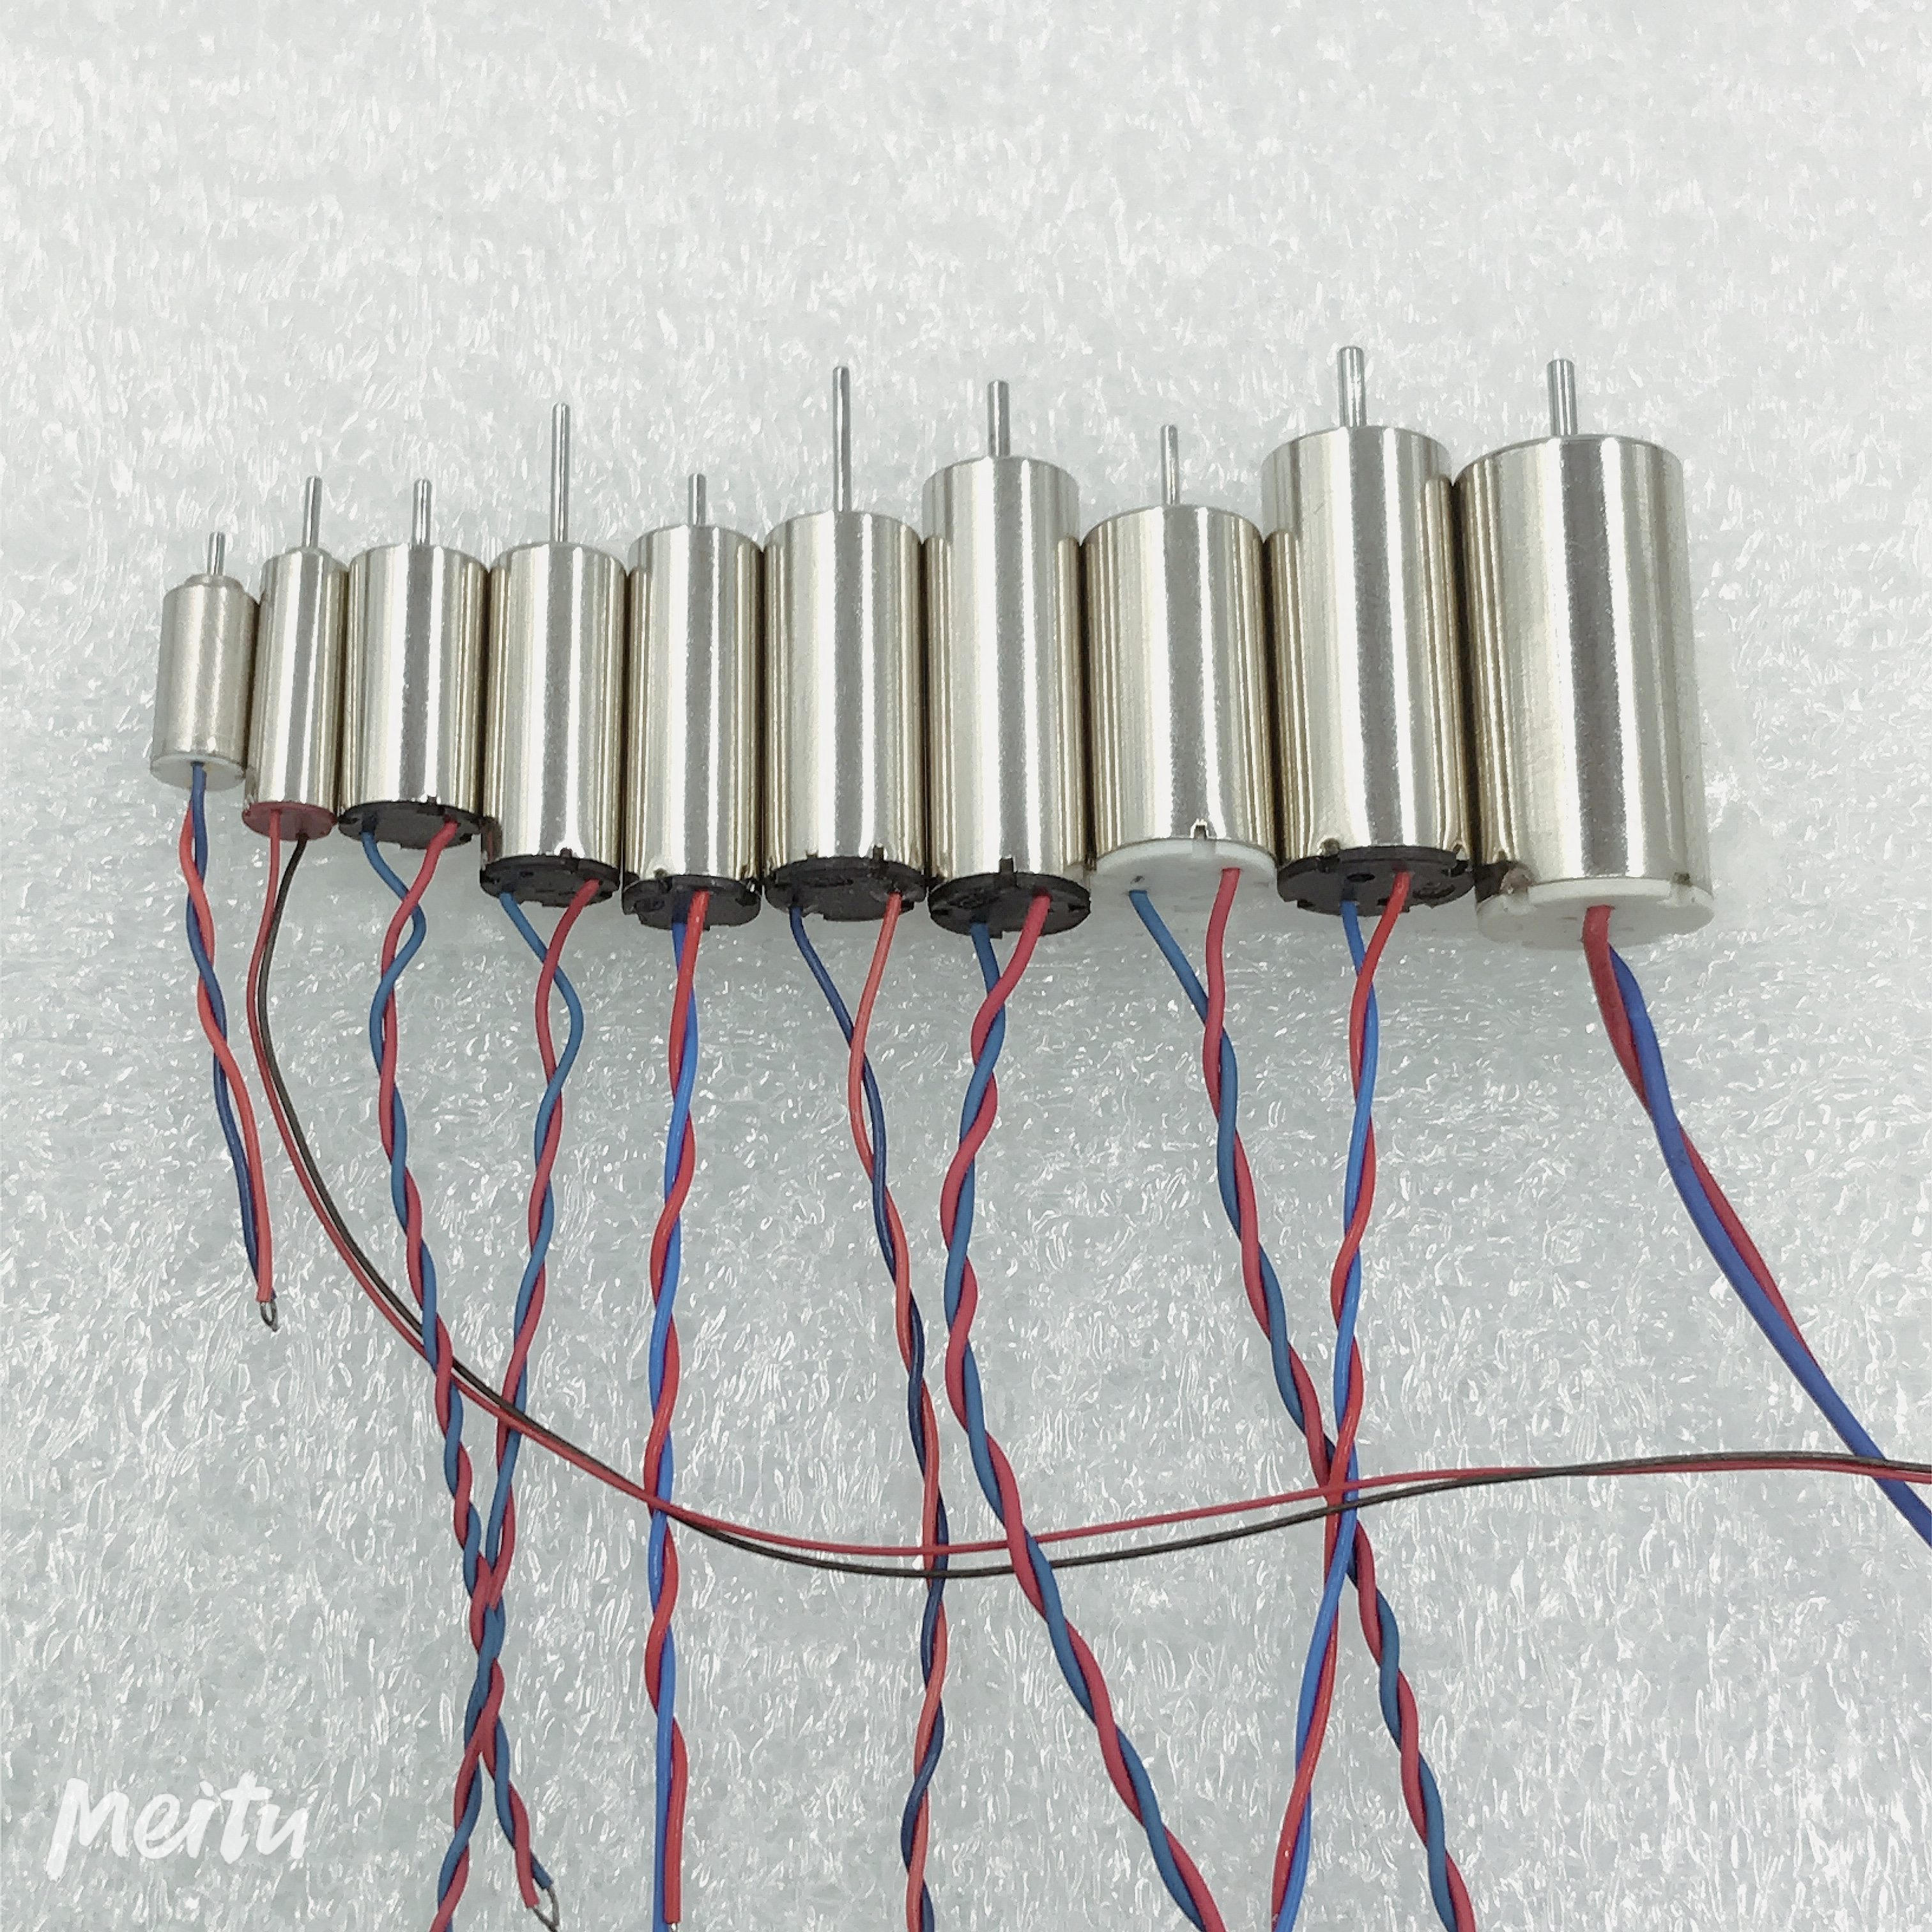 1PC DC 3V-3.7V Coreless Motor 0408,412,612,615,617.716,720,816,8520,1020 High Speed RC Drone Strong Magnetic DIY Aircraft